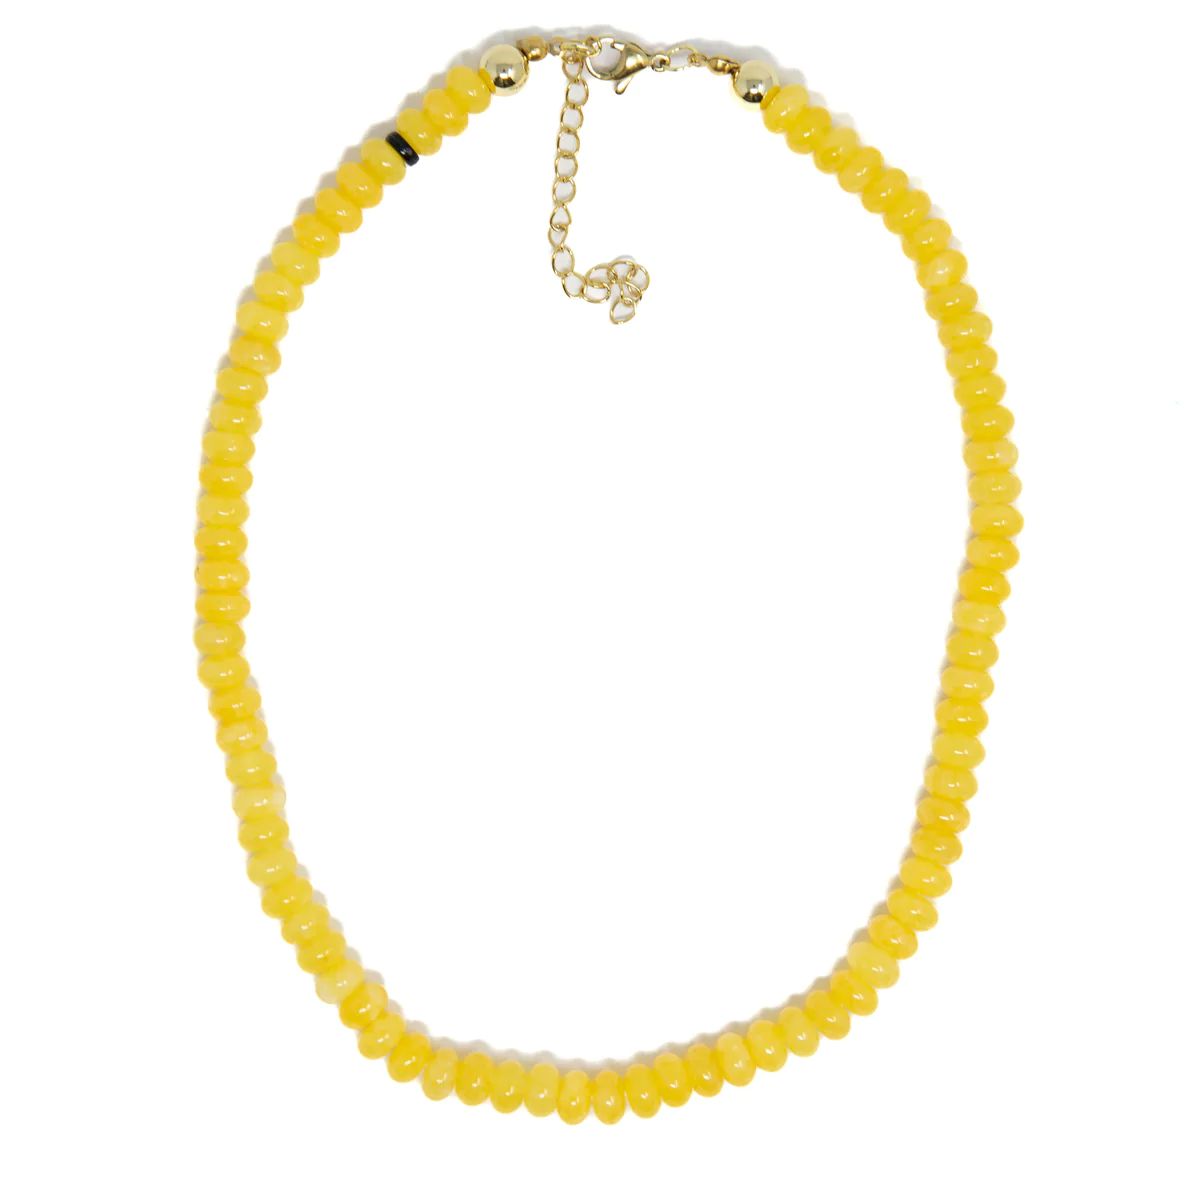 Sunny Yellow Necklace | Allie + Bess